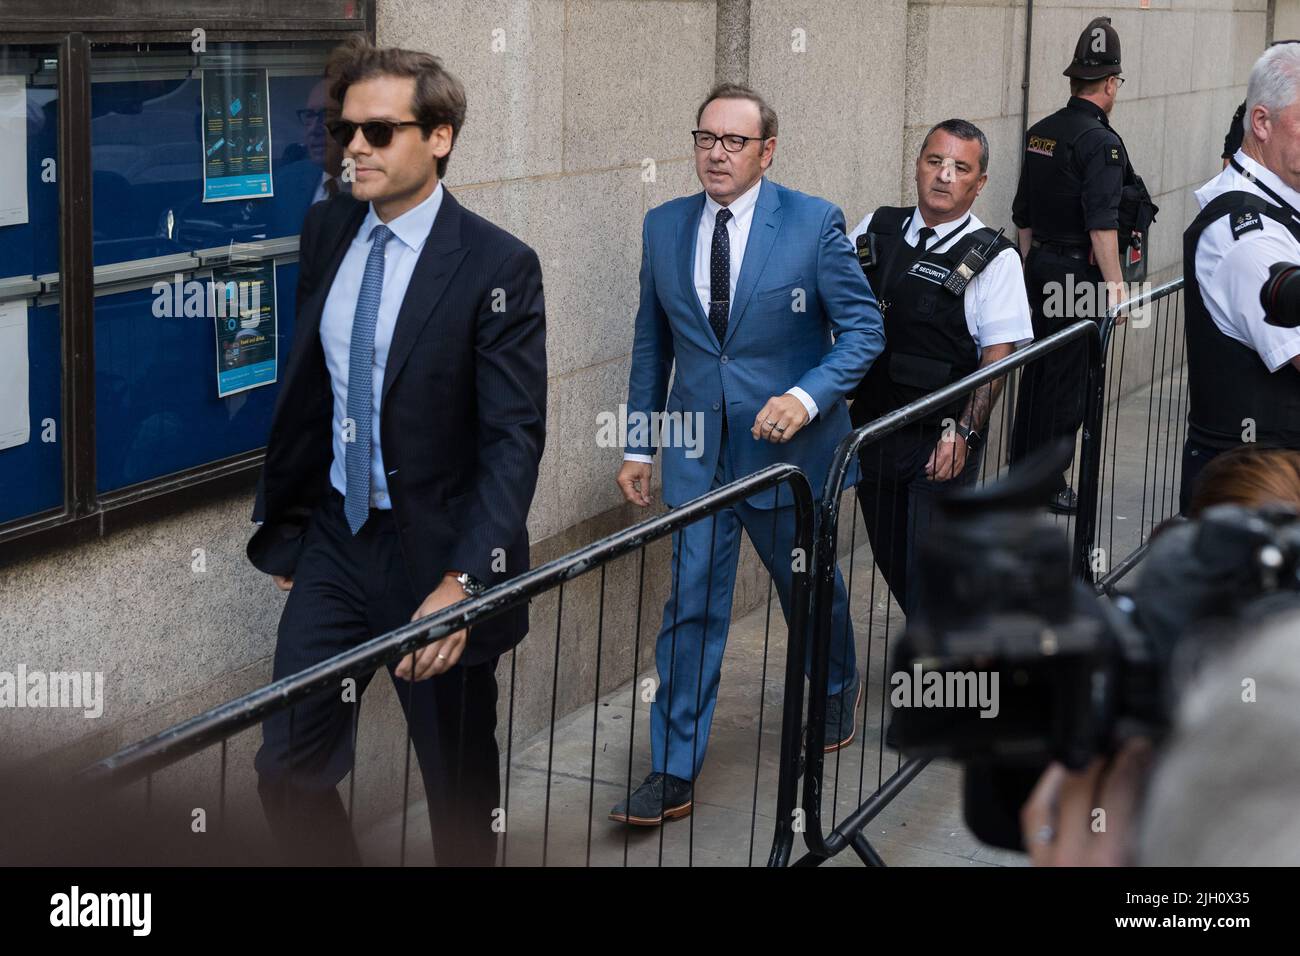 London, UK. 14th July, 2022. US actor Kevin Spacey arrives at the Old Bailey for the plea and trial preparation hearing over four charges of sexual offences against three men. The Oscar-winning actor is expected to plead not guilty to the charges related to the offences which allegedly took place in London and Gloucestershire between 2005 and 2013 while Mr. Spacey was the artistic director at the Old Vic theatre. Credit: Wiktor Szymanowicz/Alamy Live News Stock Photo